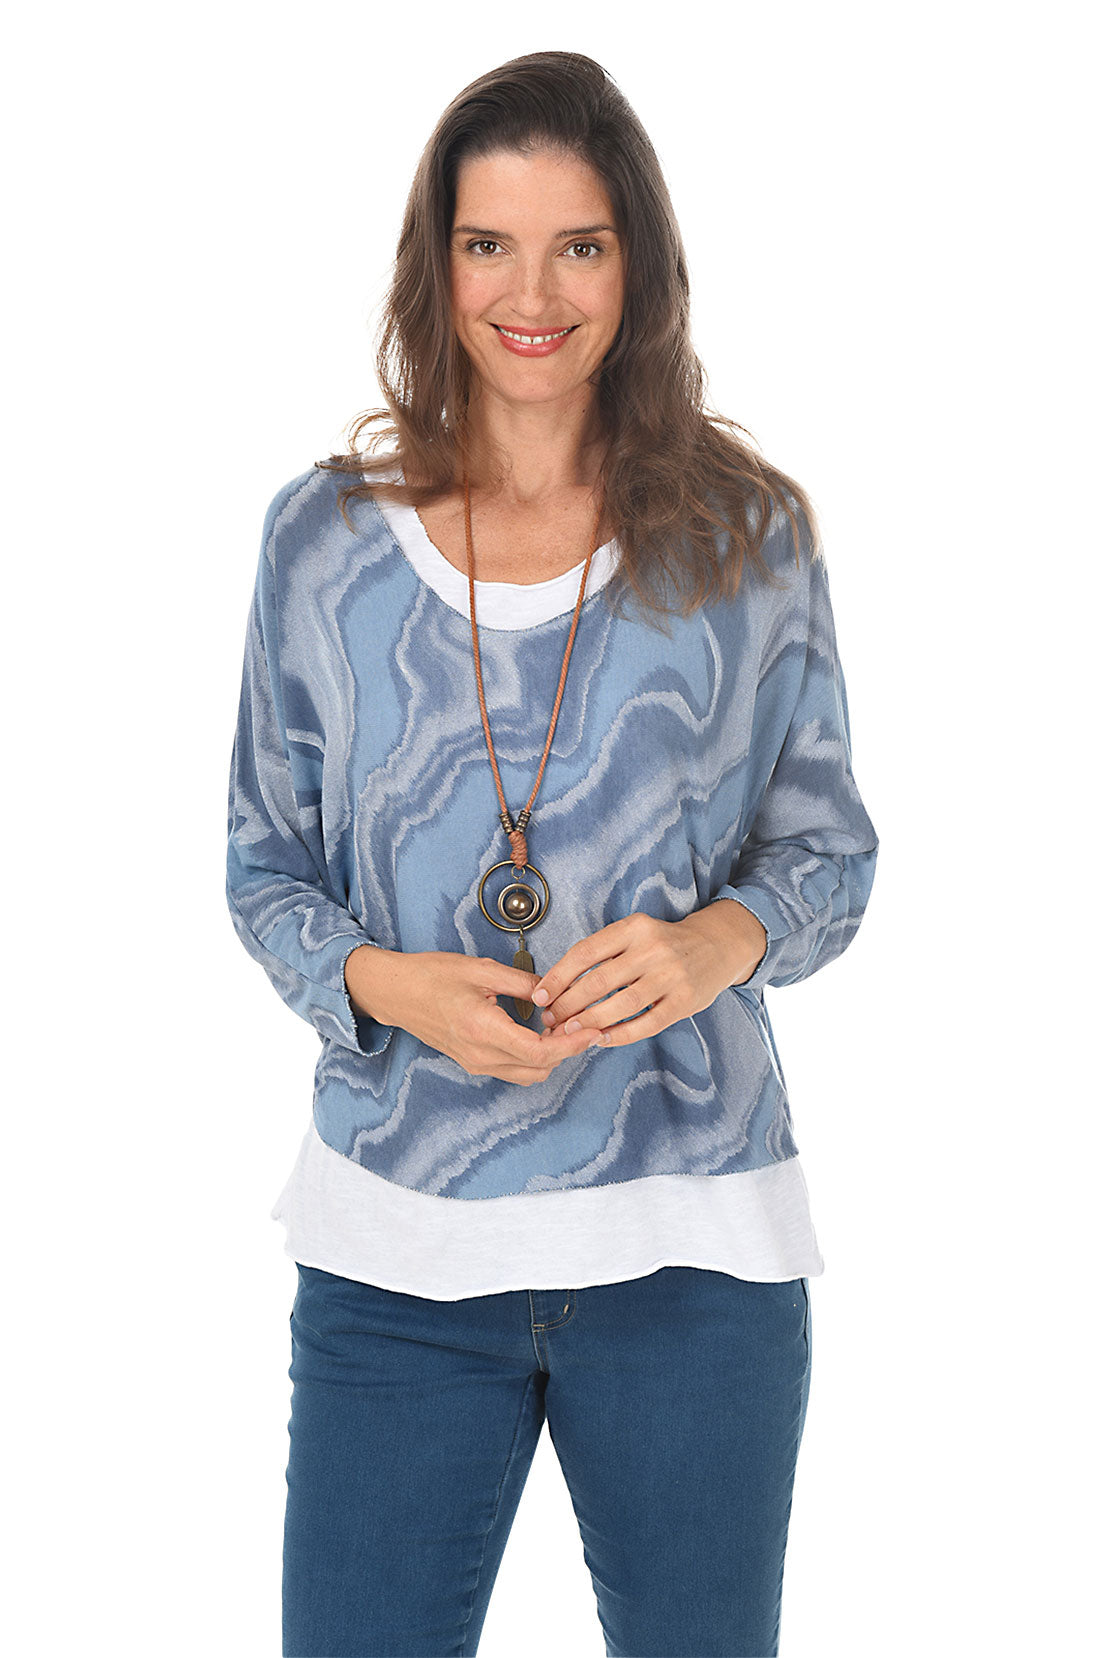 Blue Jay Marble Layered Necklace Top